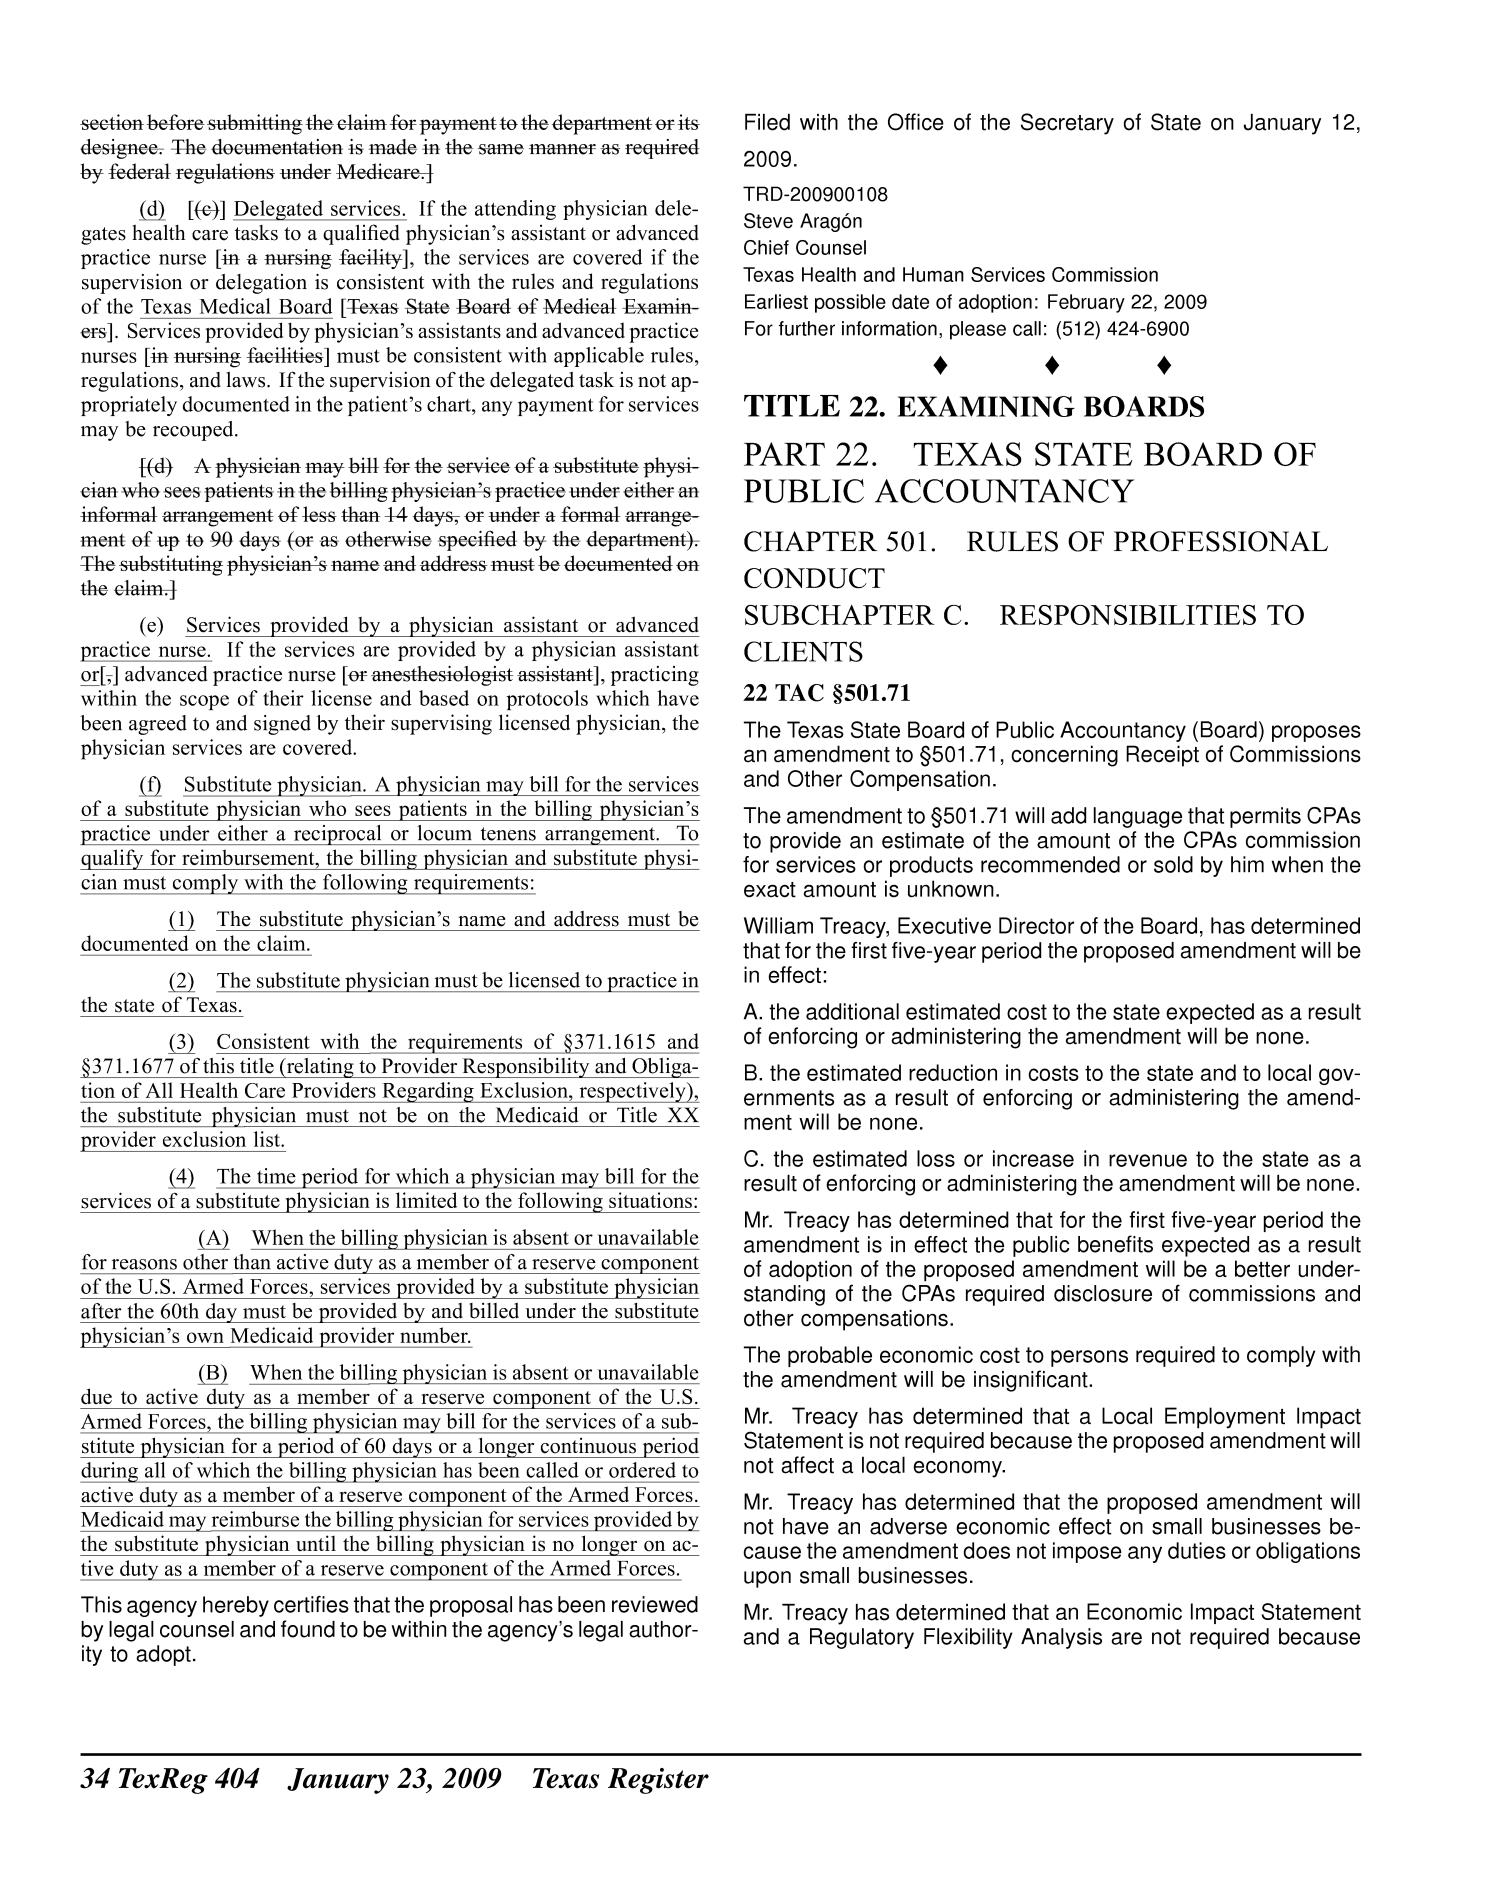 Texas Register, Volume 34, Number 4, Pages 393-490, January 23, 2009
                                                
                                                    404
                                                